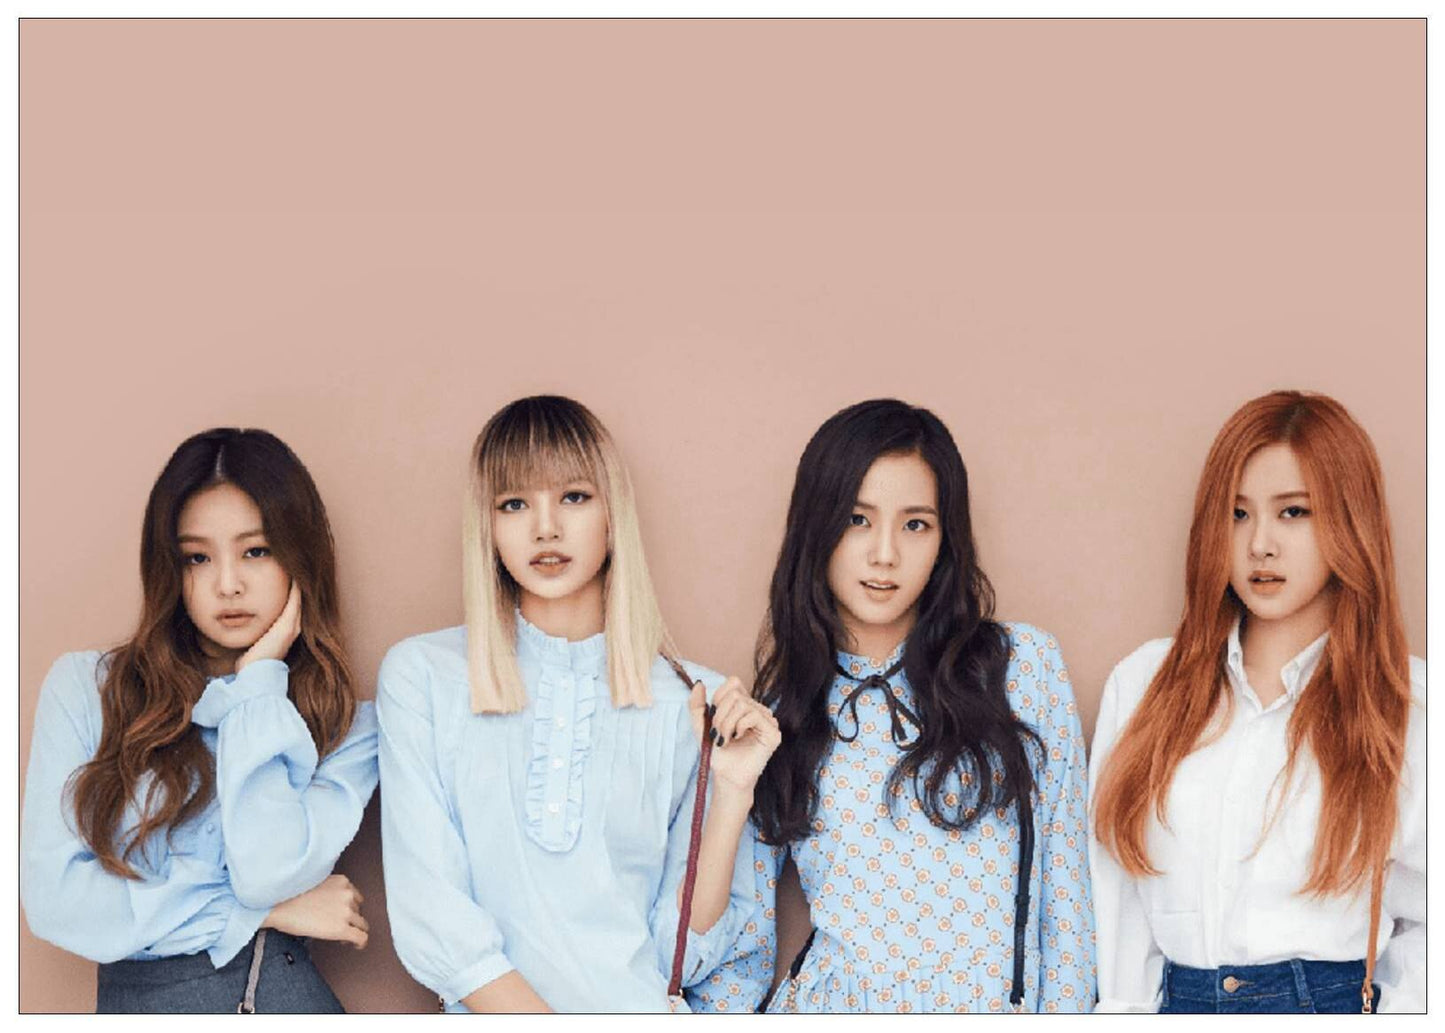 Poster BlackPink Collection- 1 (Variants Available)